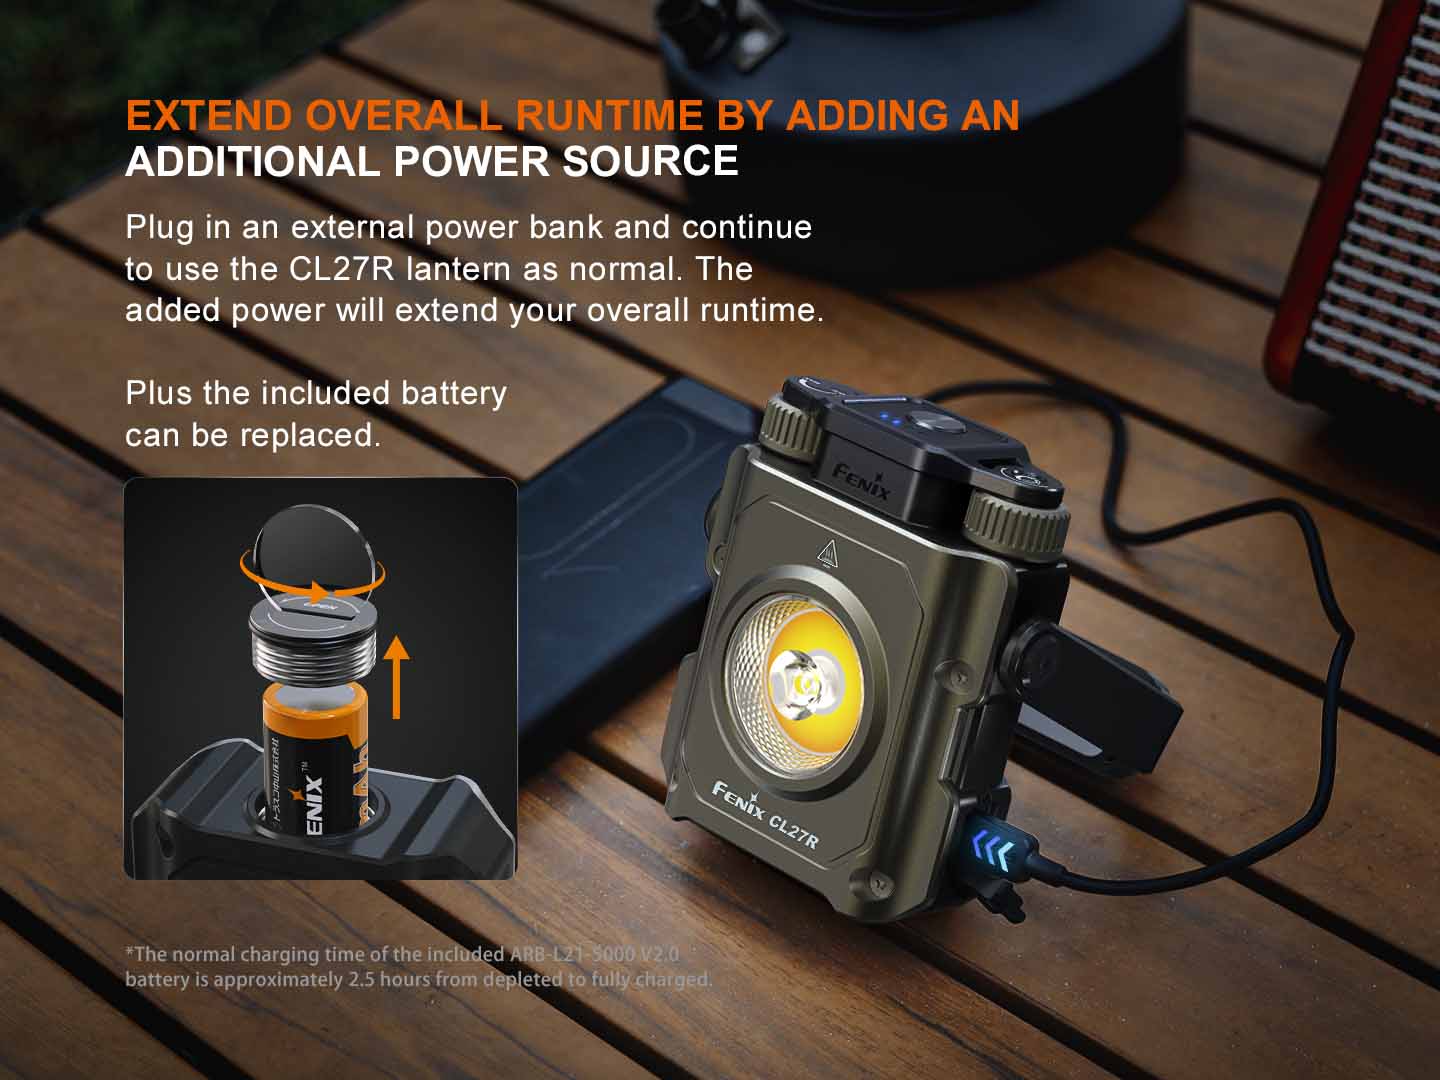 fenix cl27r rechargeable lantern add power bank extended runtimes